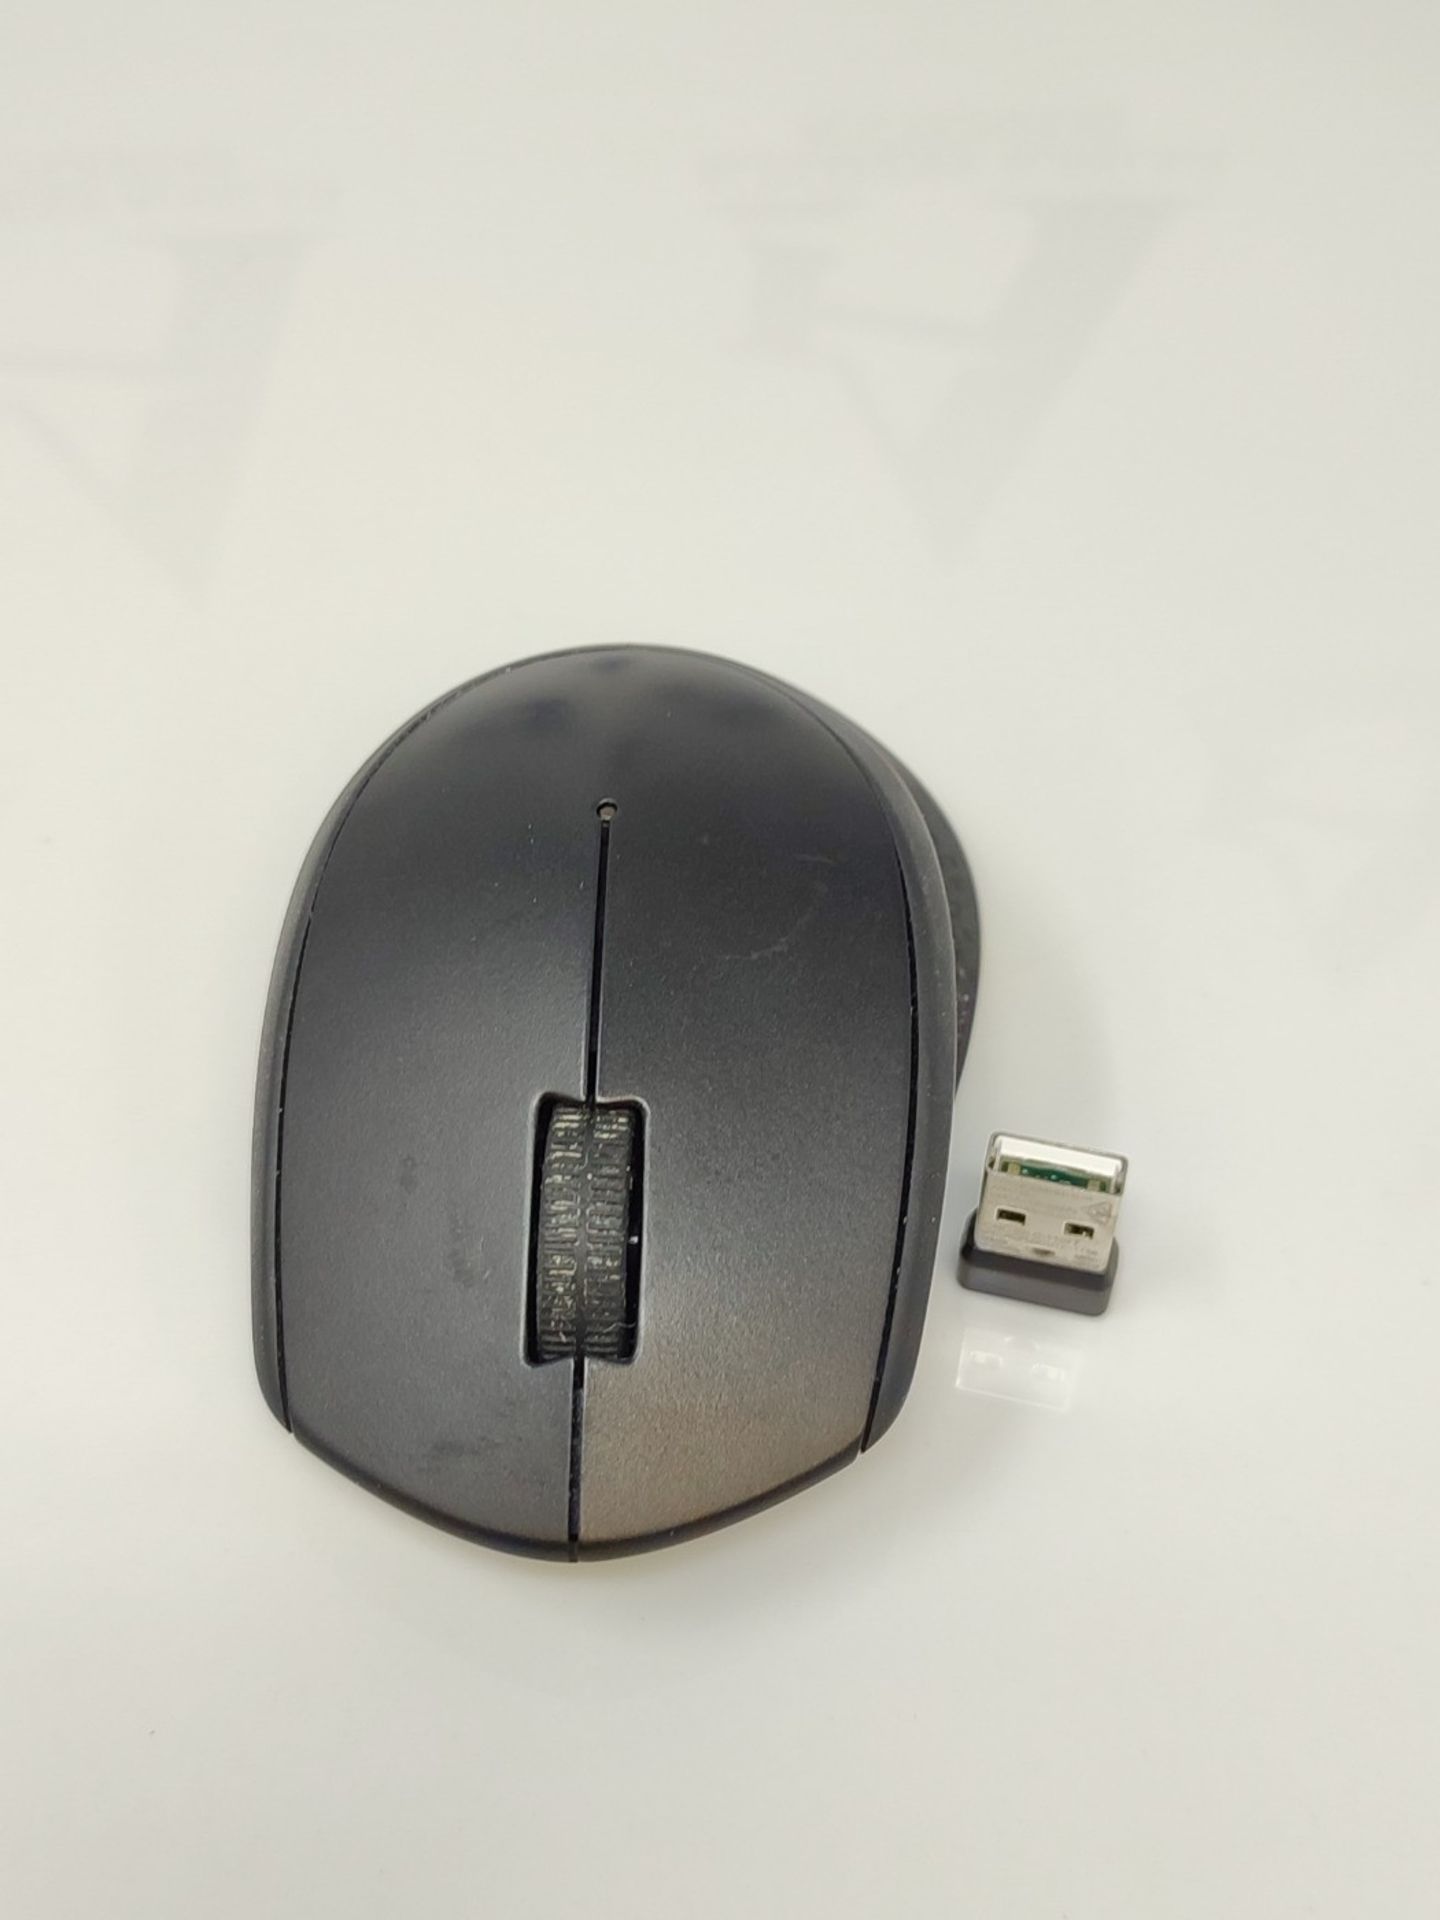 Logitech M330 SILENT PLUS Wireless Mouse, 2.4 GHz with USB Nano Receiver, 1000 DPI Opt - Image 2 of 2